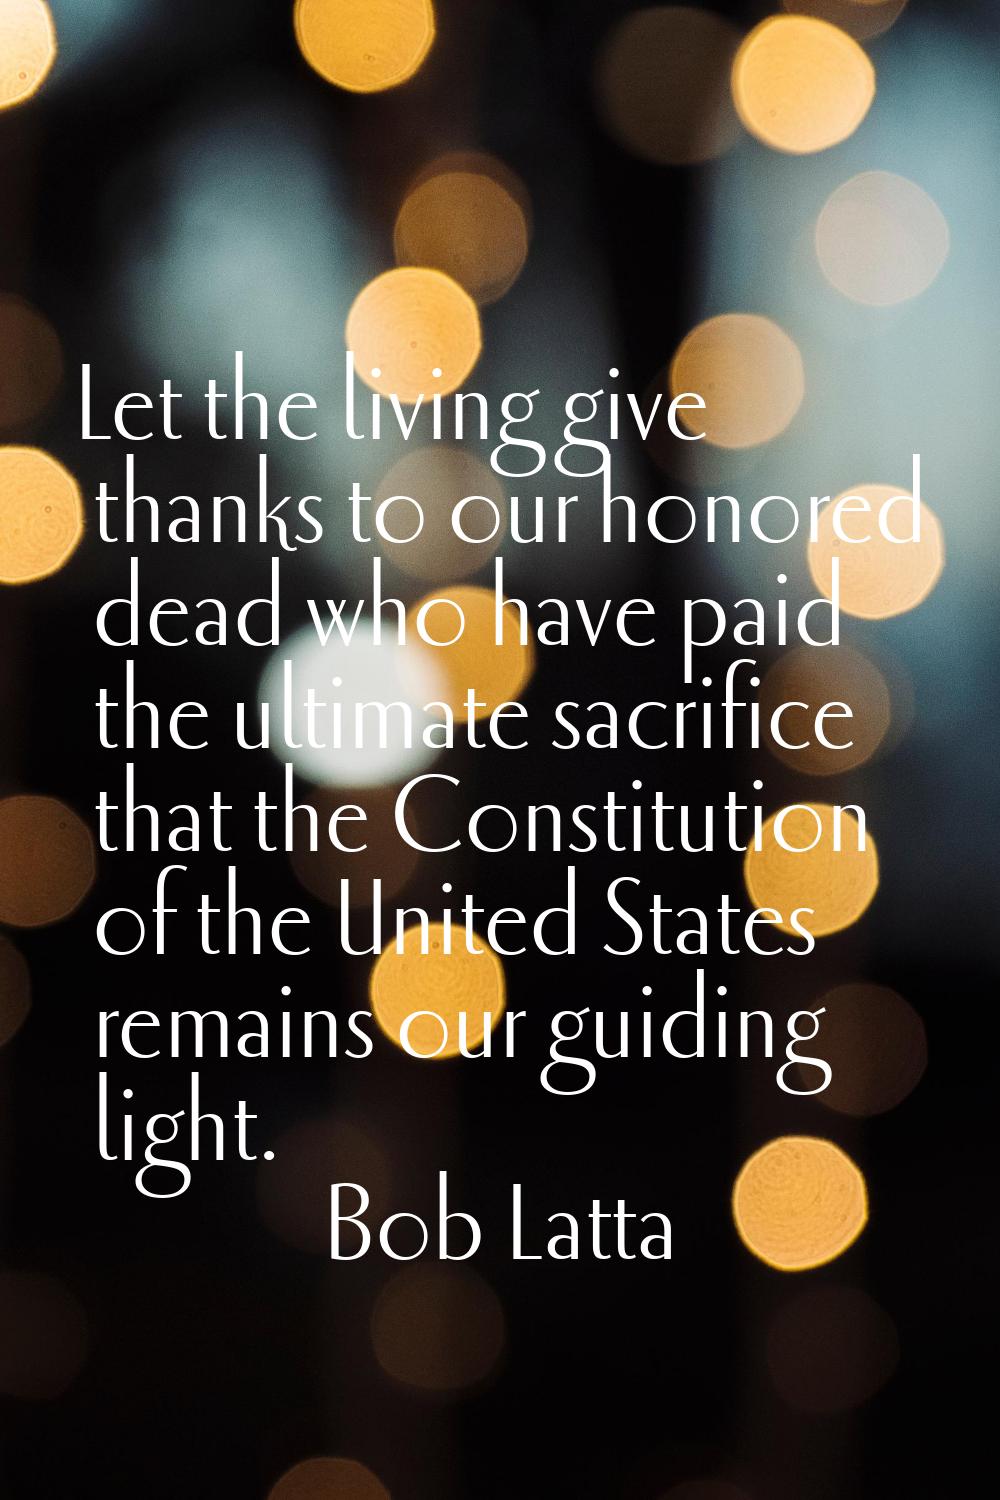 Let the living give thanks to our honored dead who have paid the ultimate sacrifice that the Consti